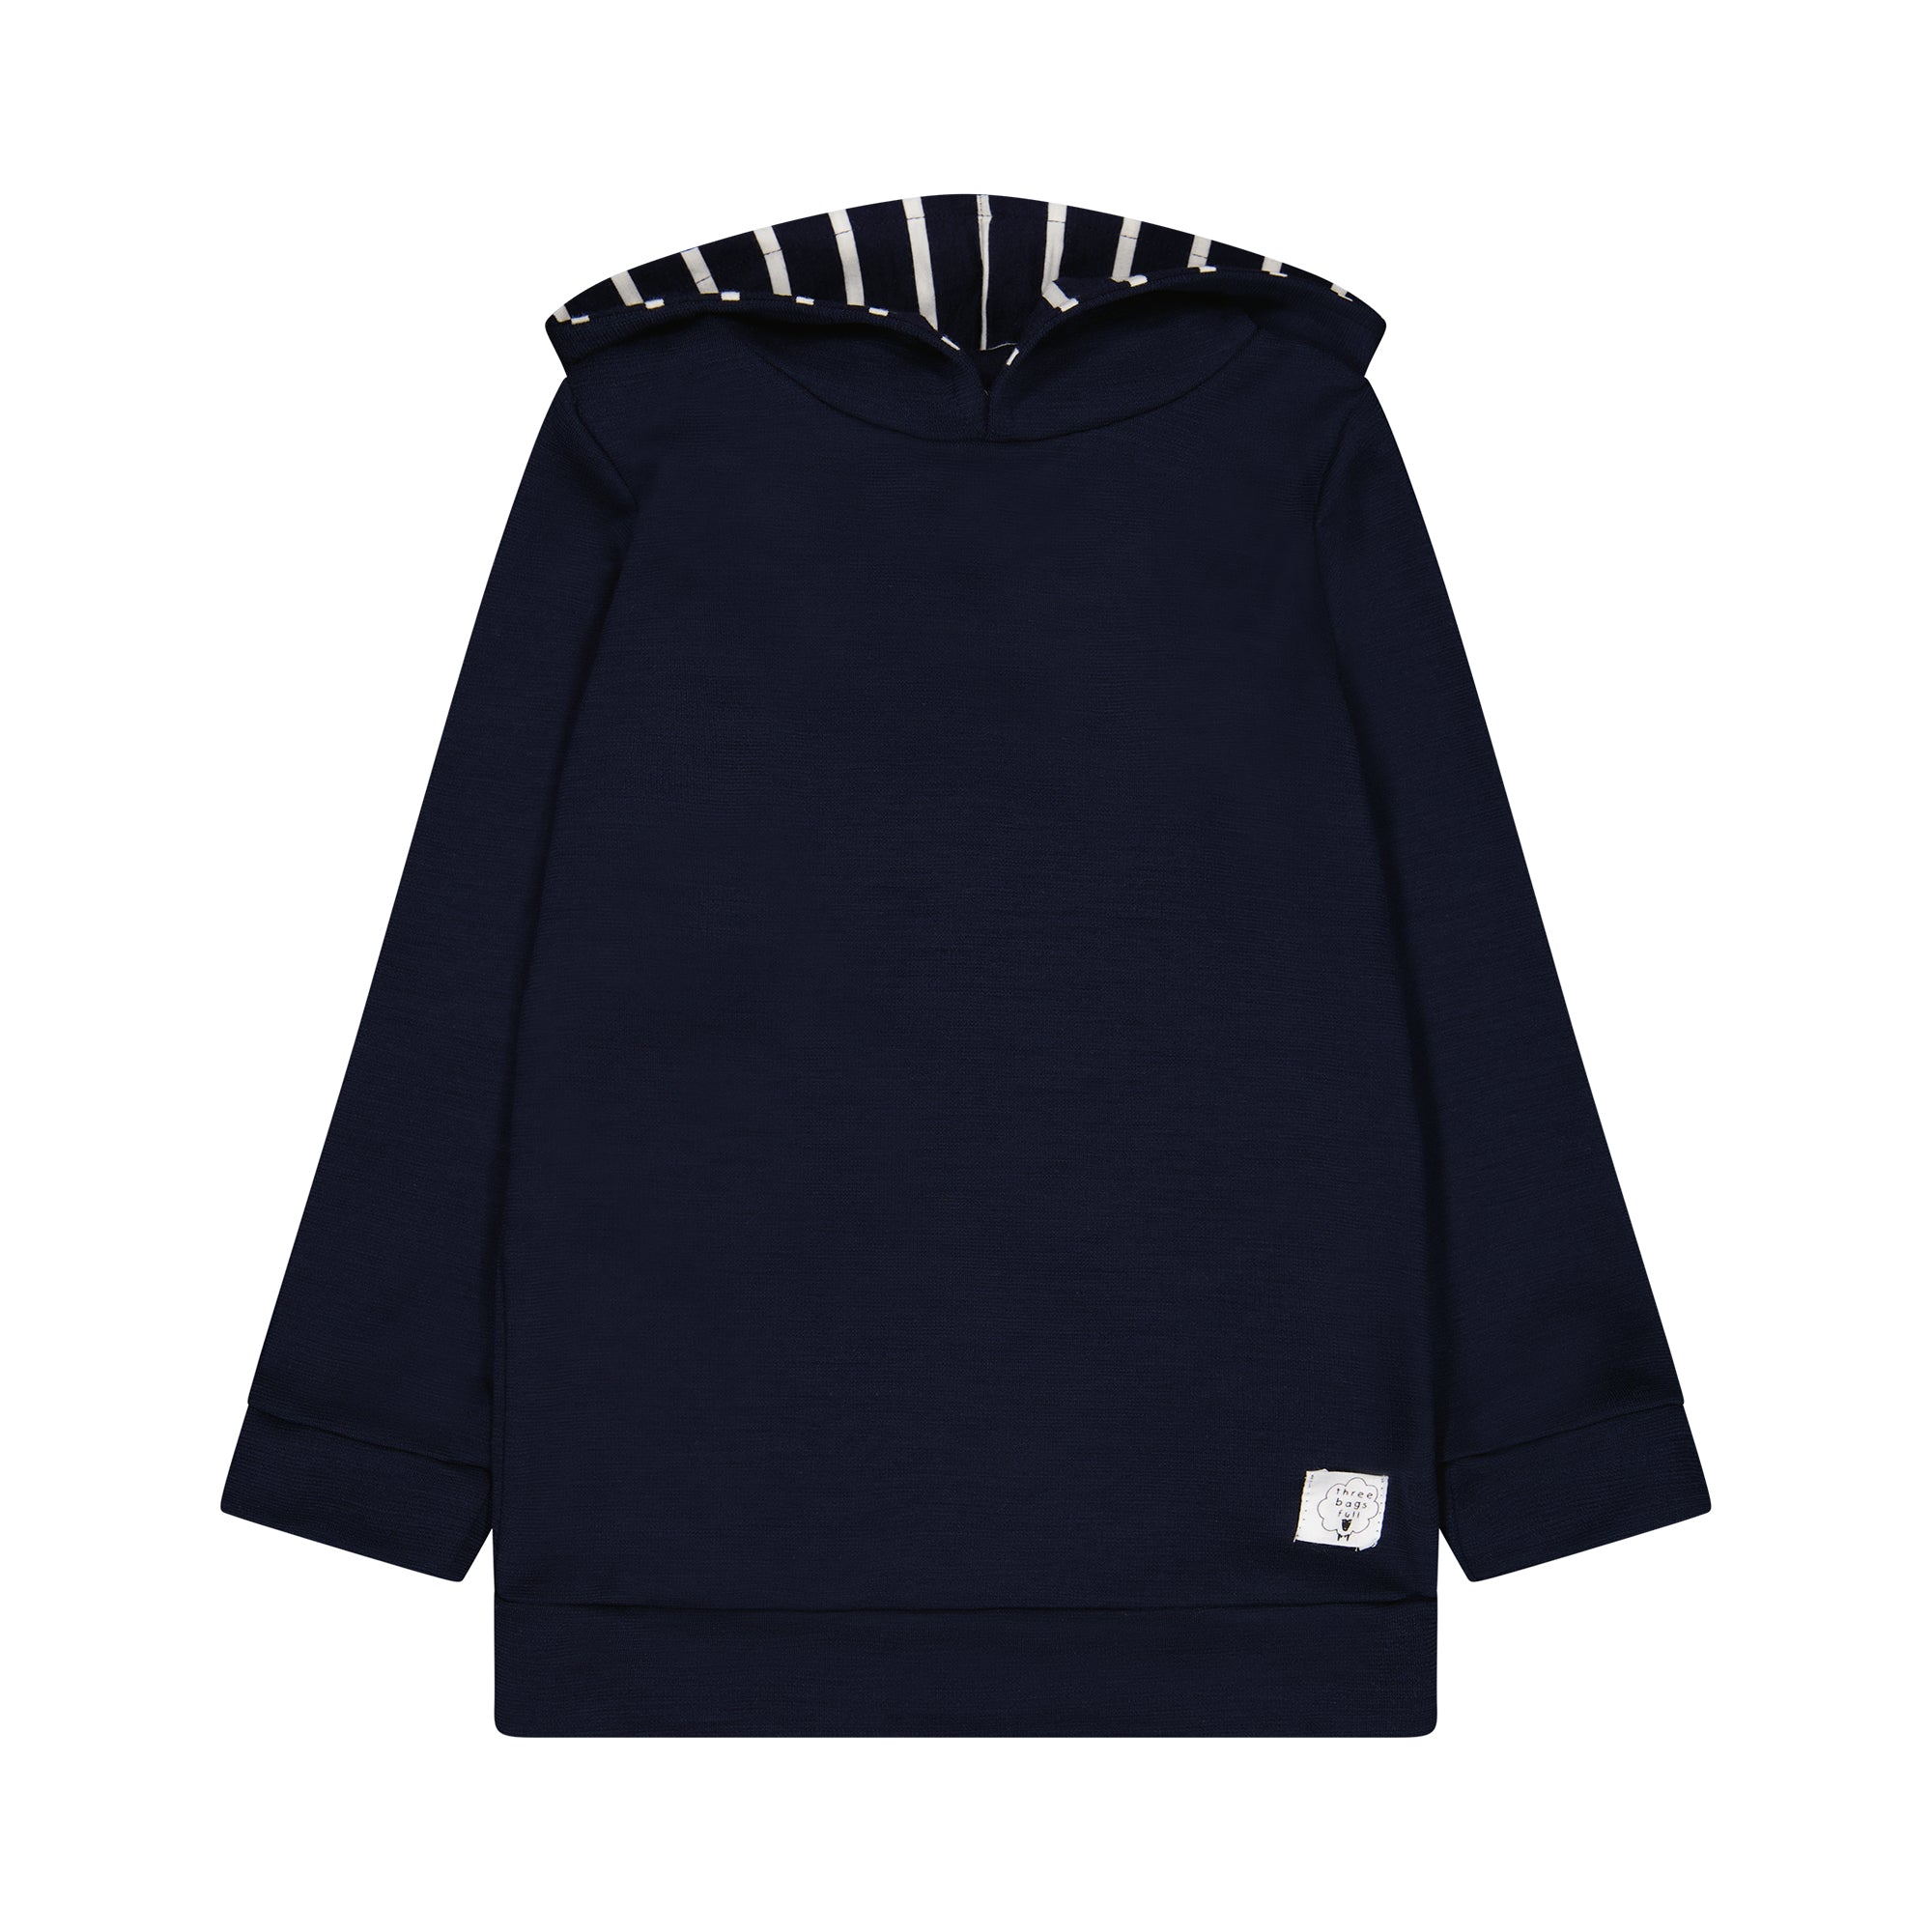 Hoodie - Navy with White Stripe